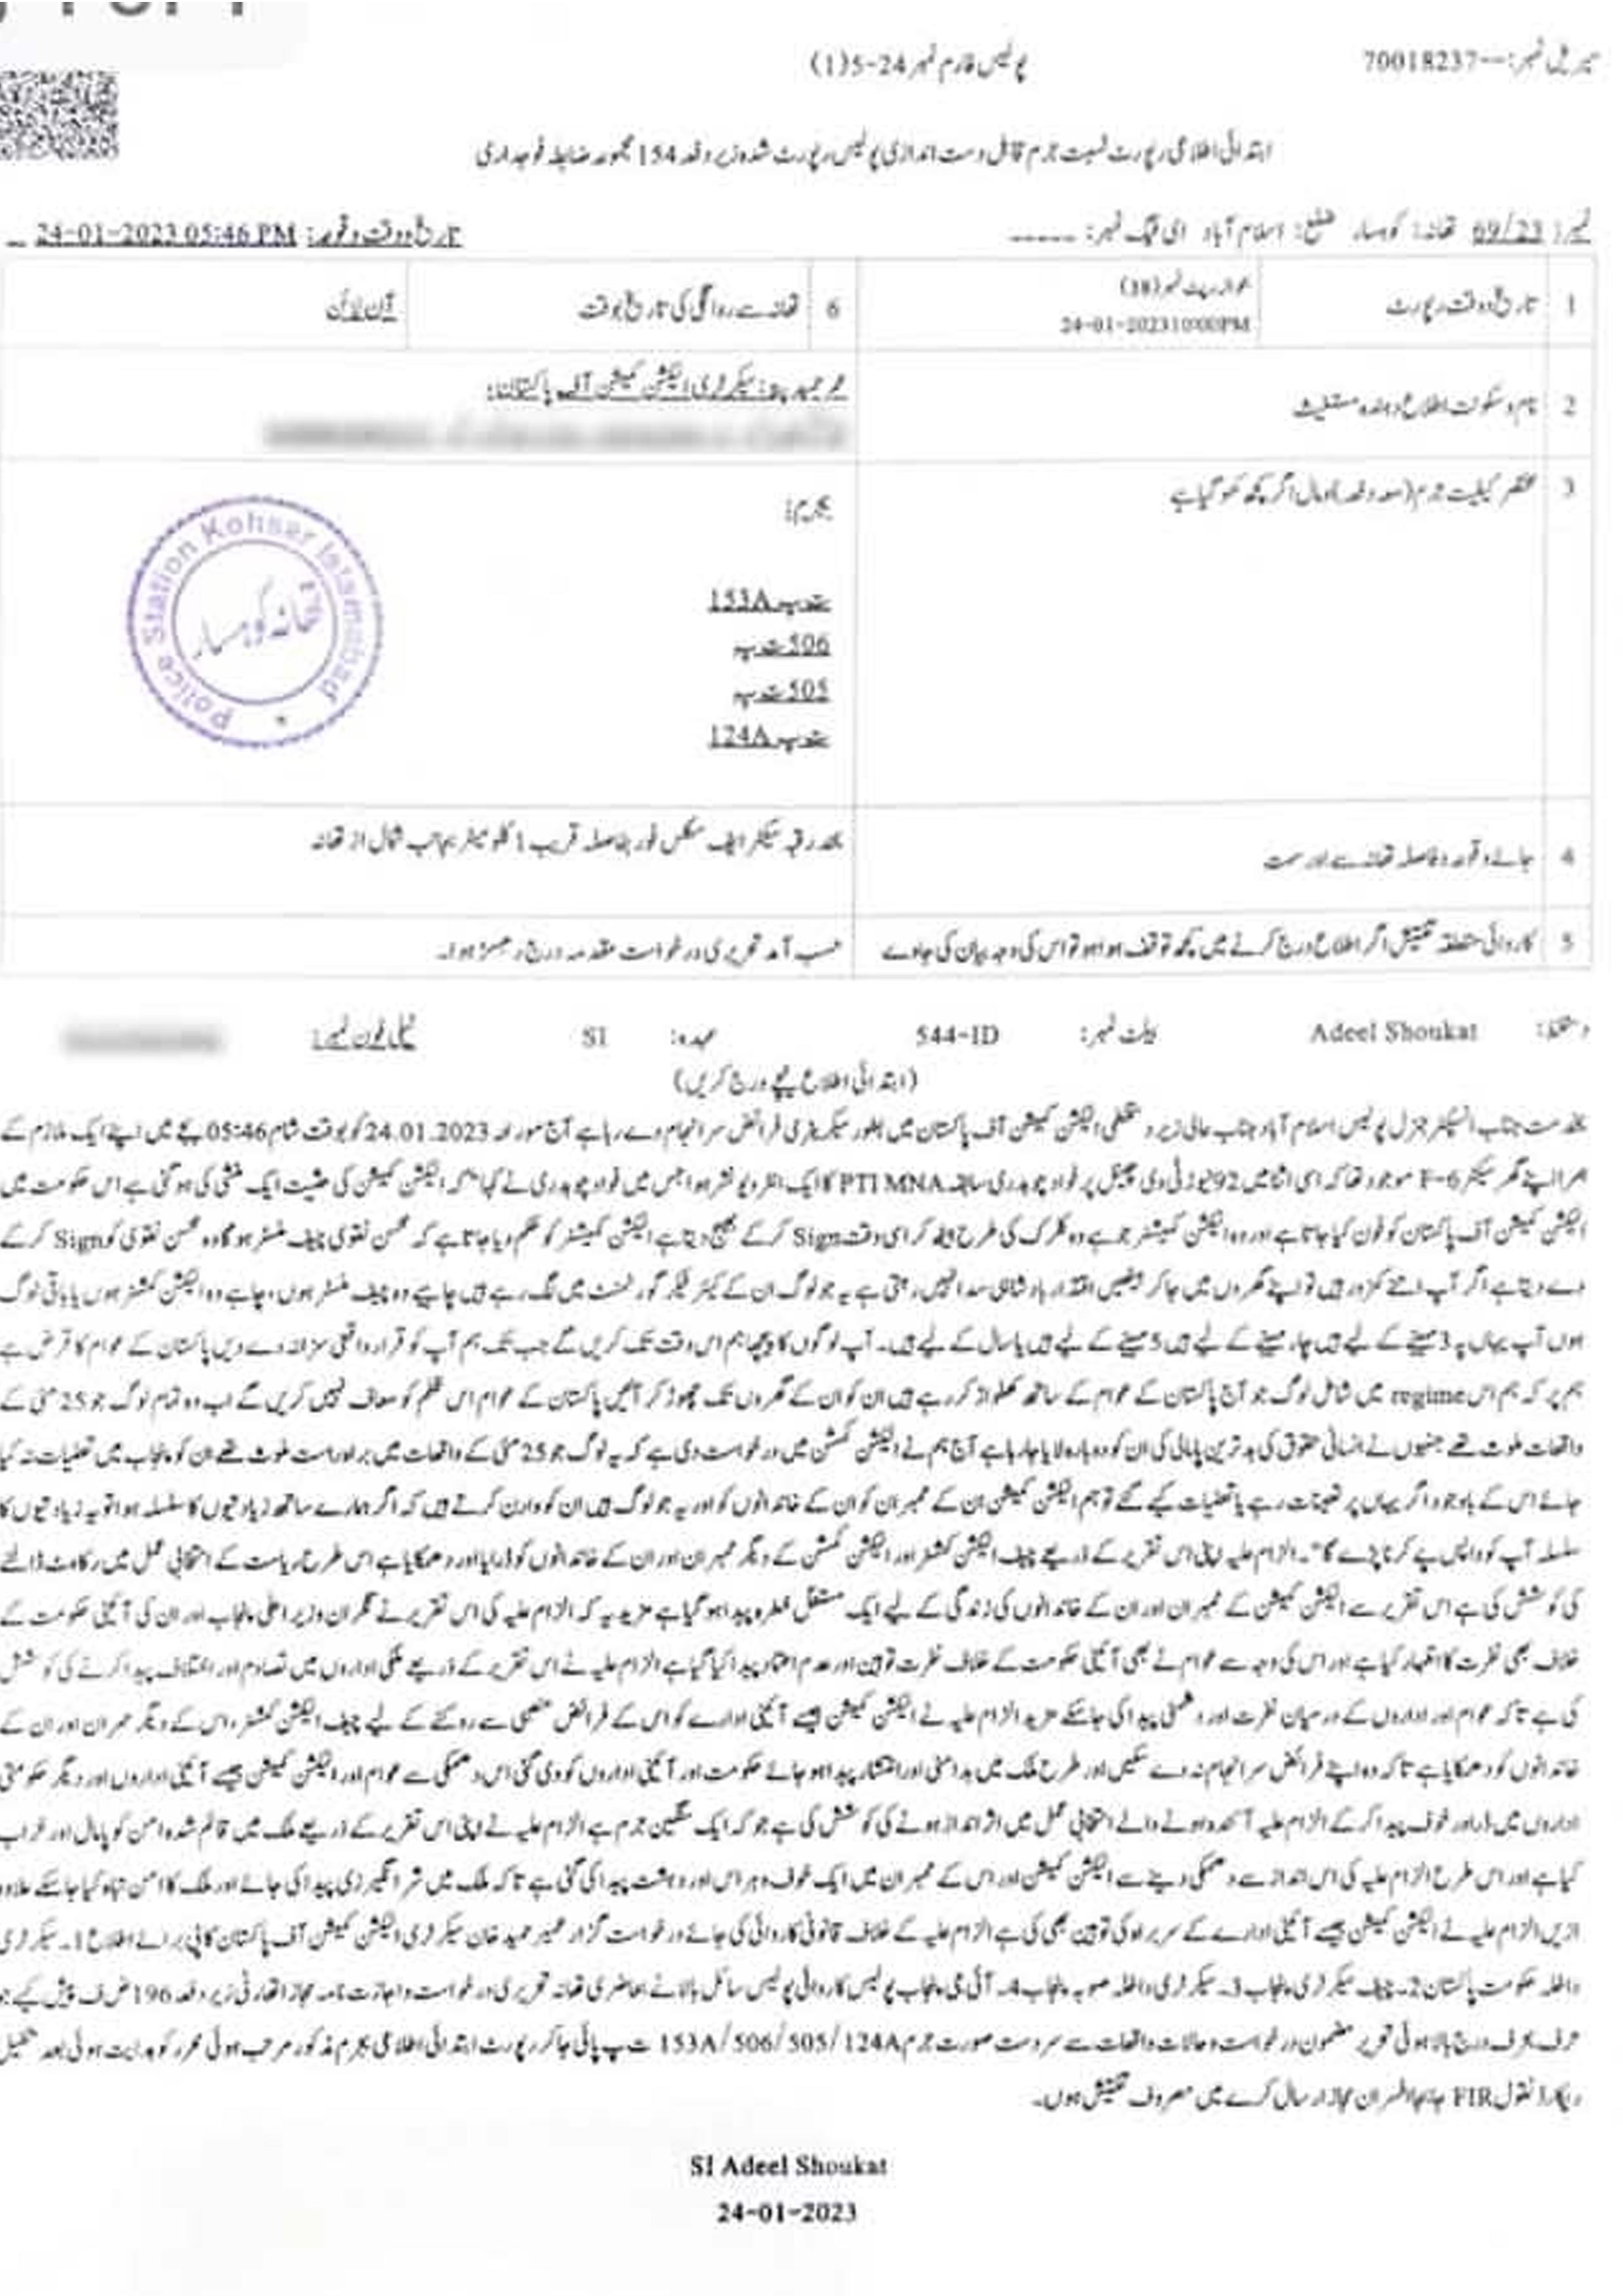 The FIR against Fawad Chaudhry. — Islamabad Police